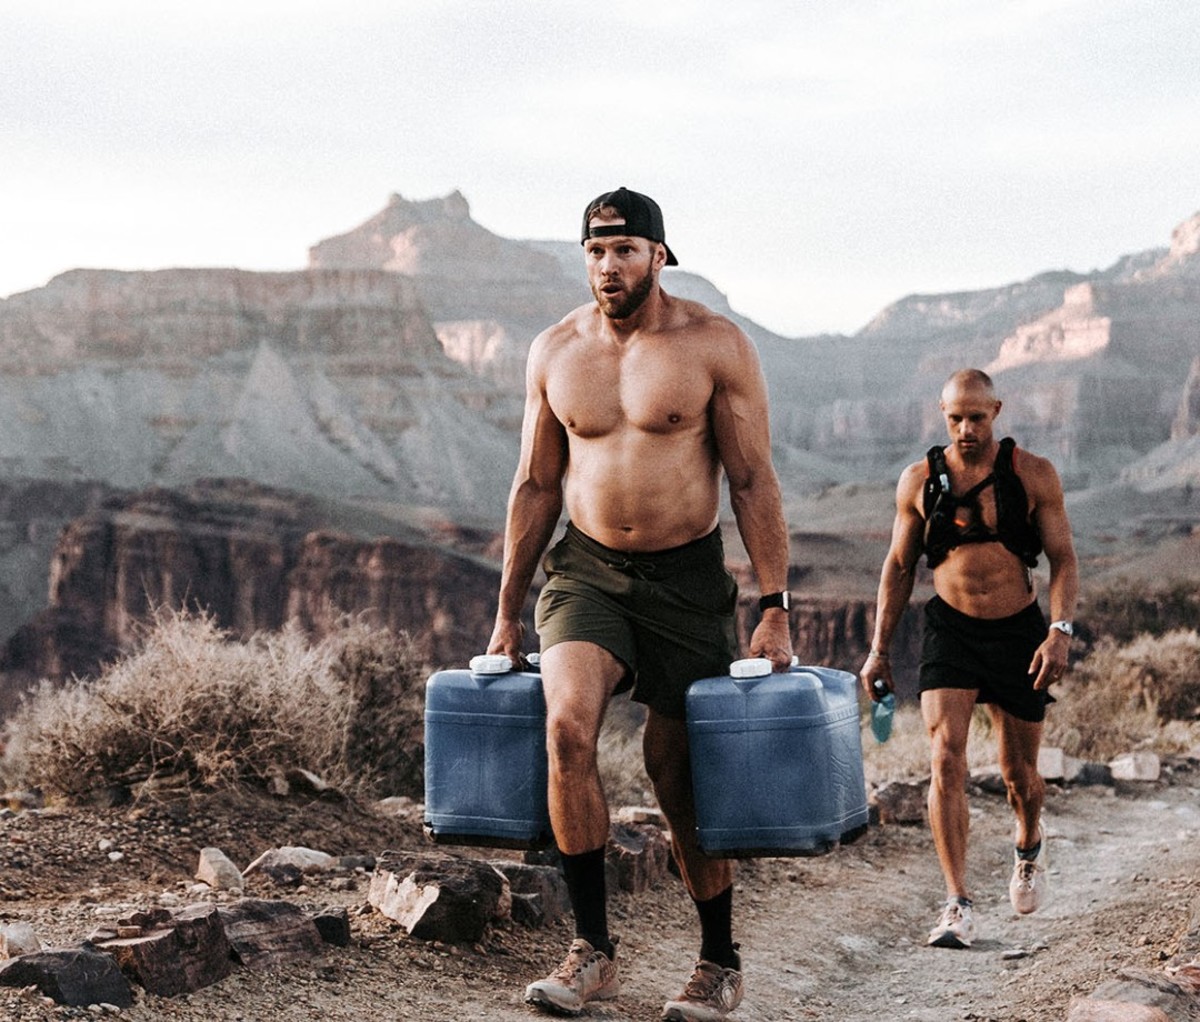 Man carrying jugs of water up Grand Canyon